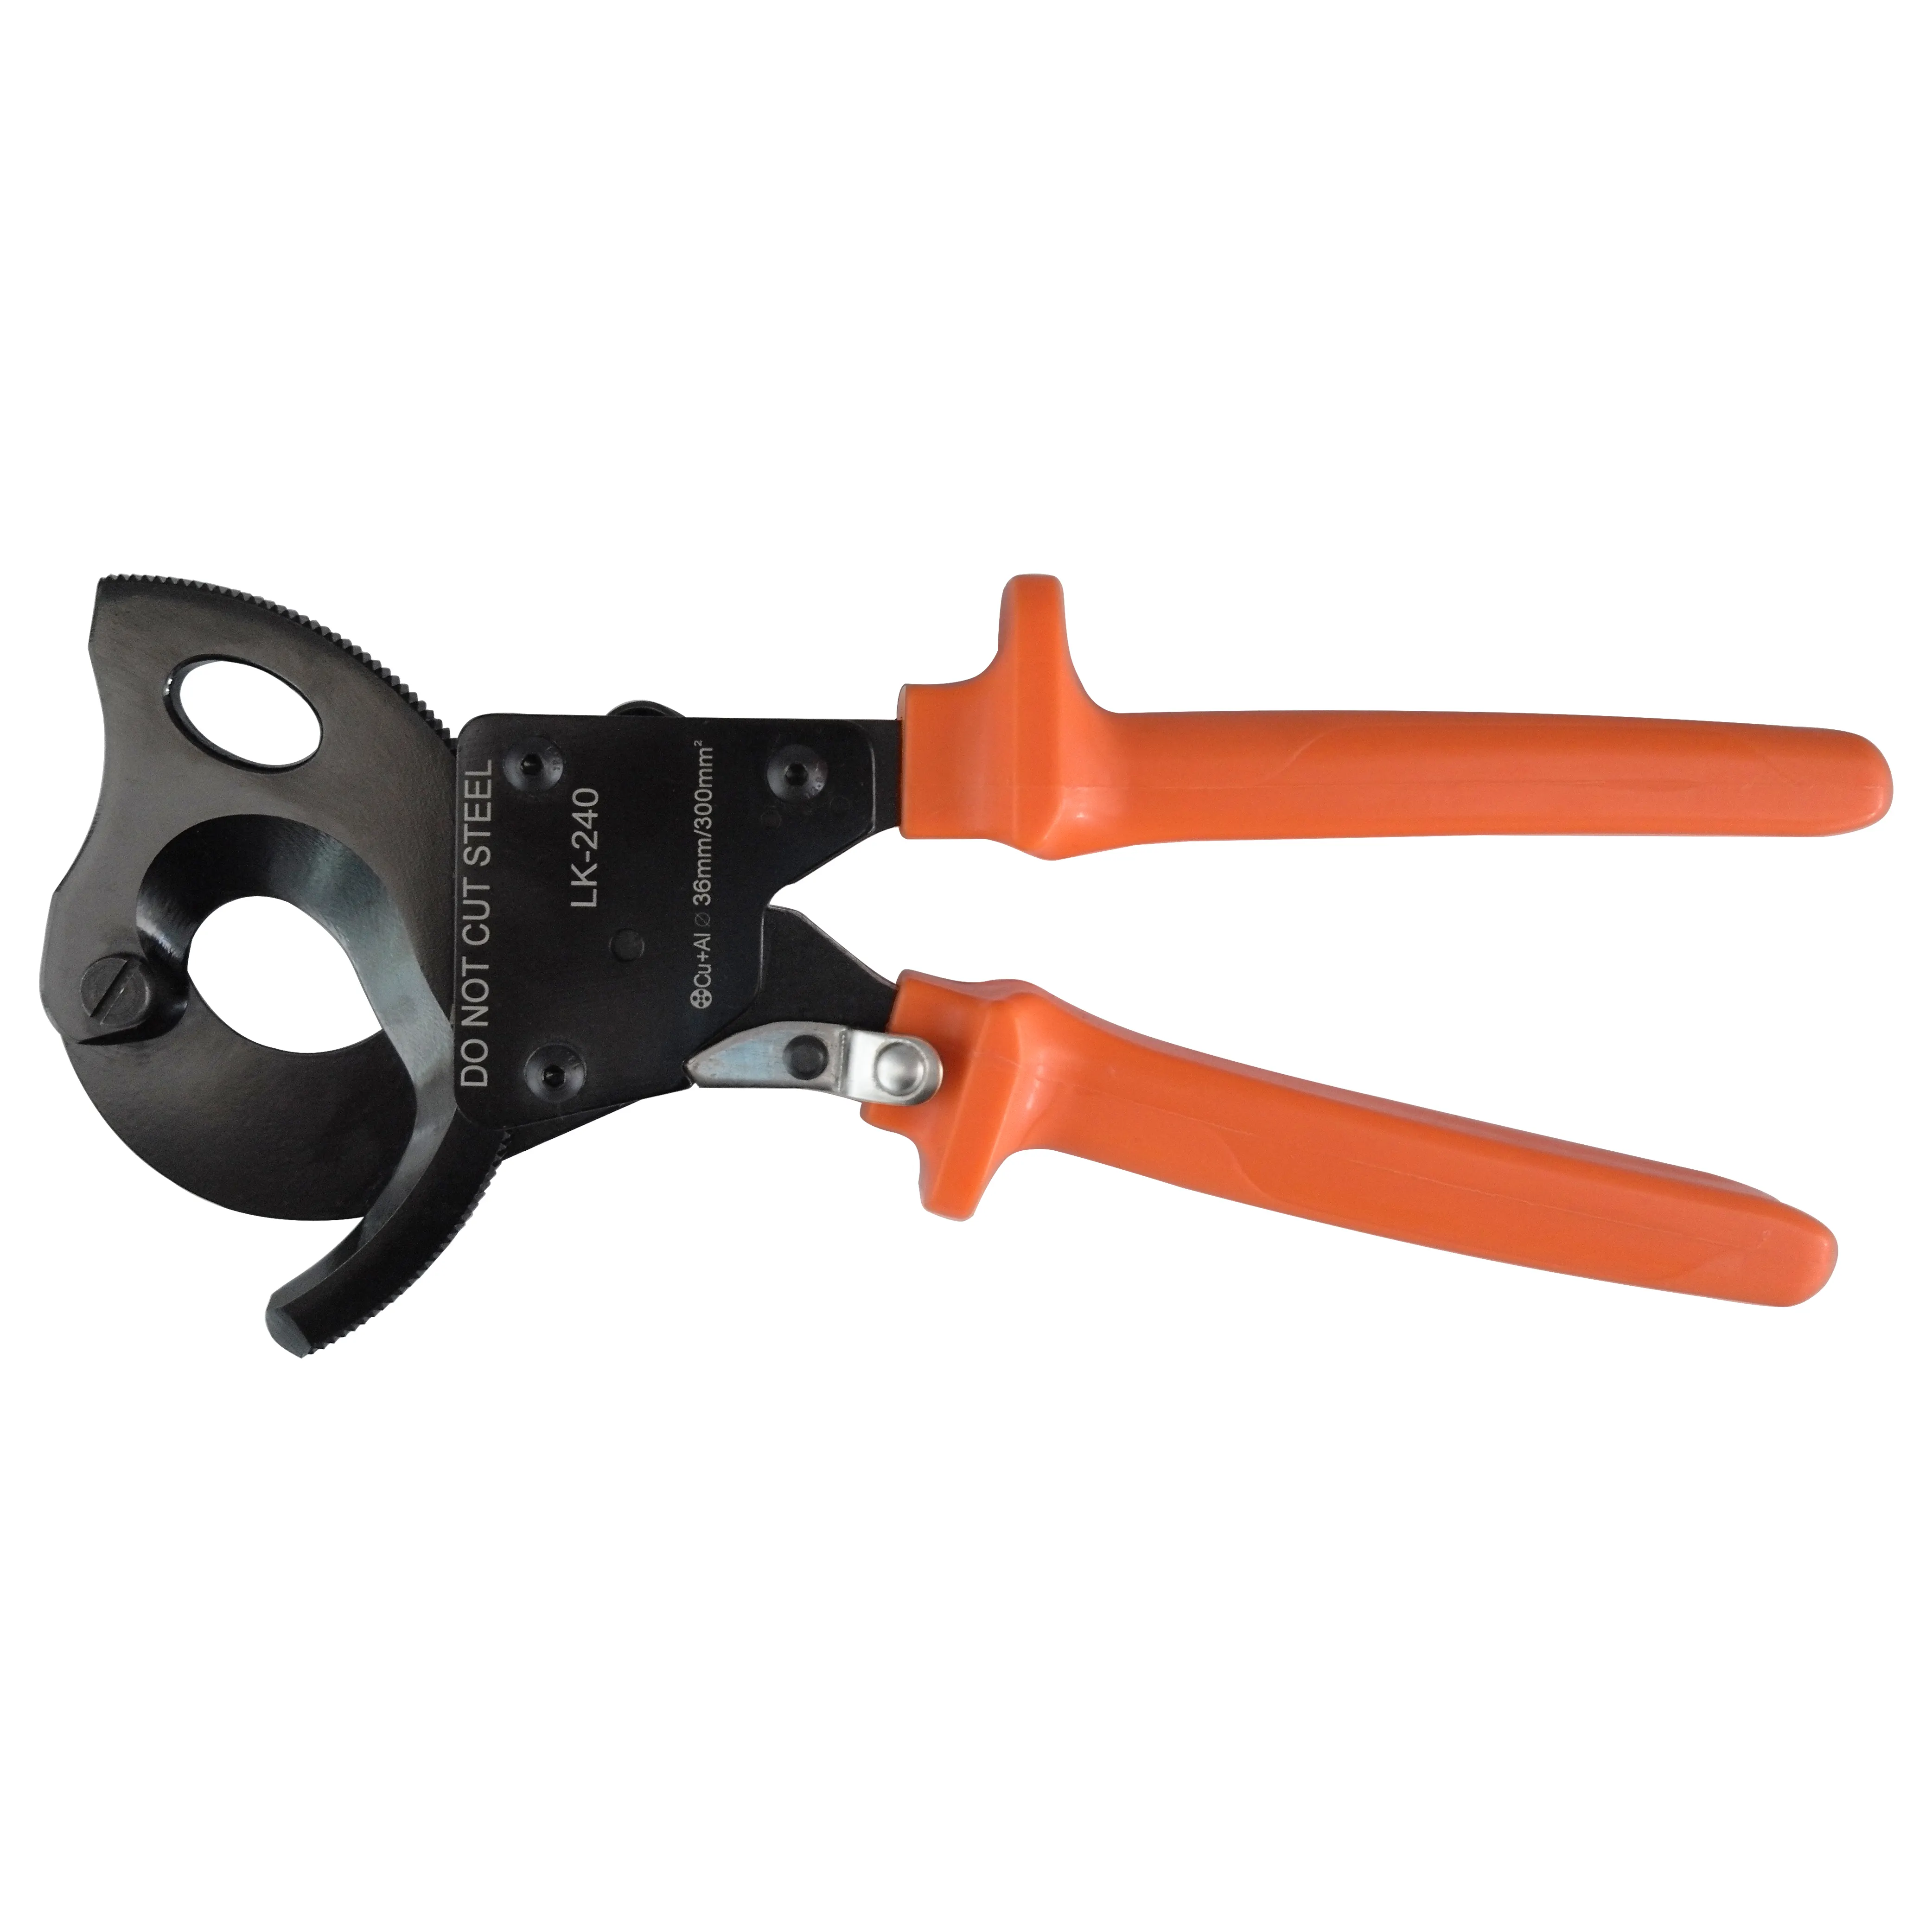 Manual Tool Quick Cutting Speed VC-36A Light weight Ratchet cable cutter